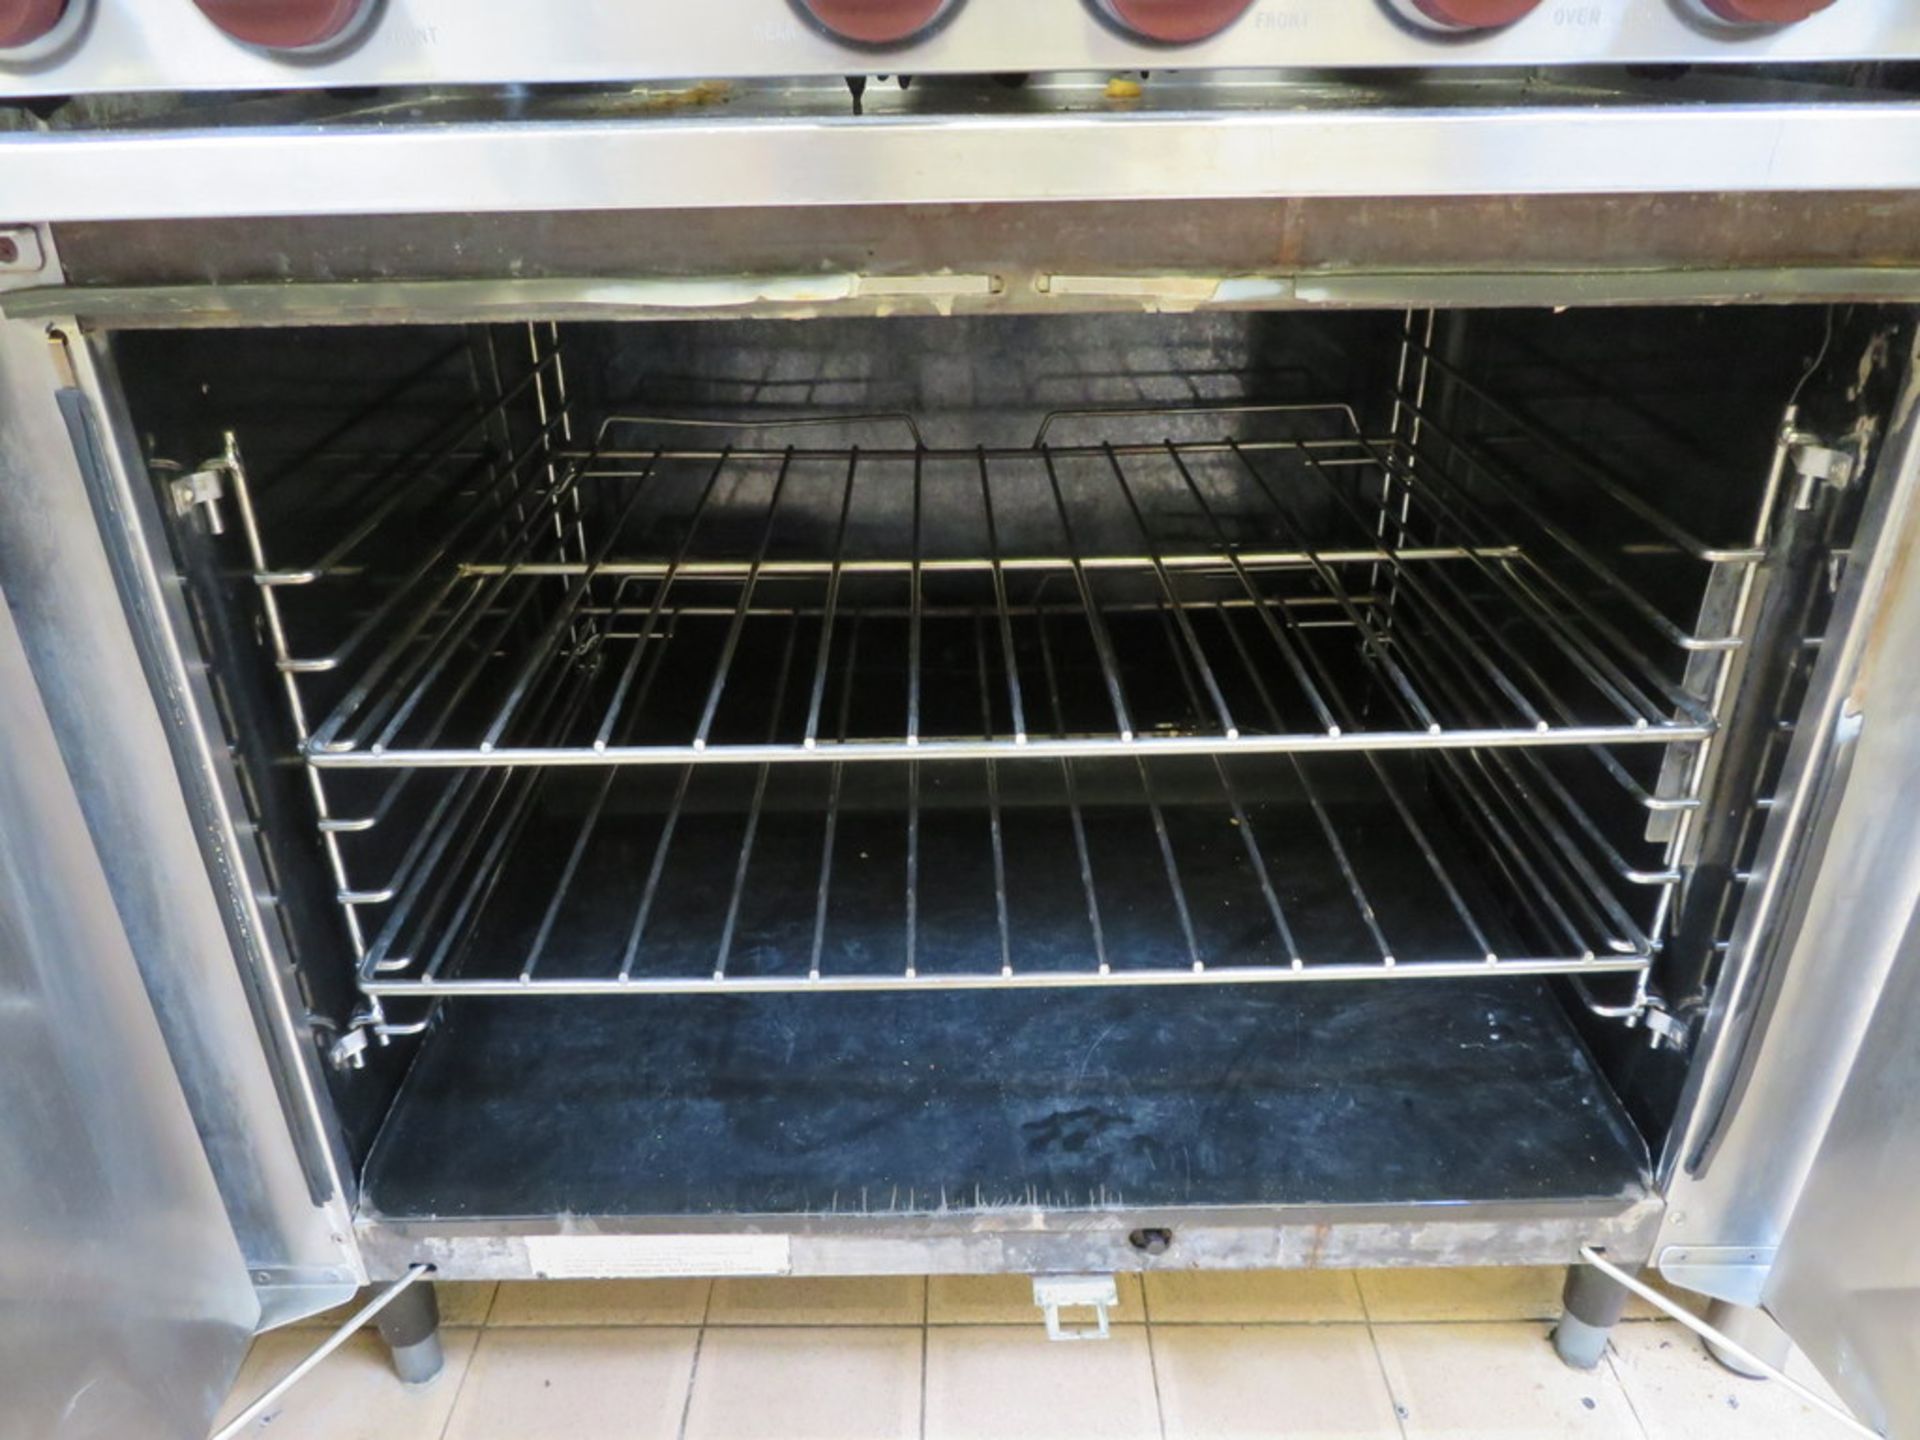 STAINLESS STEEL SIX BURNER GAS HOB AND DOUBLE DOOR OVEN - Image 3 of 3